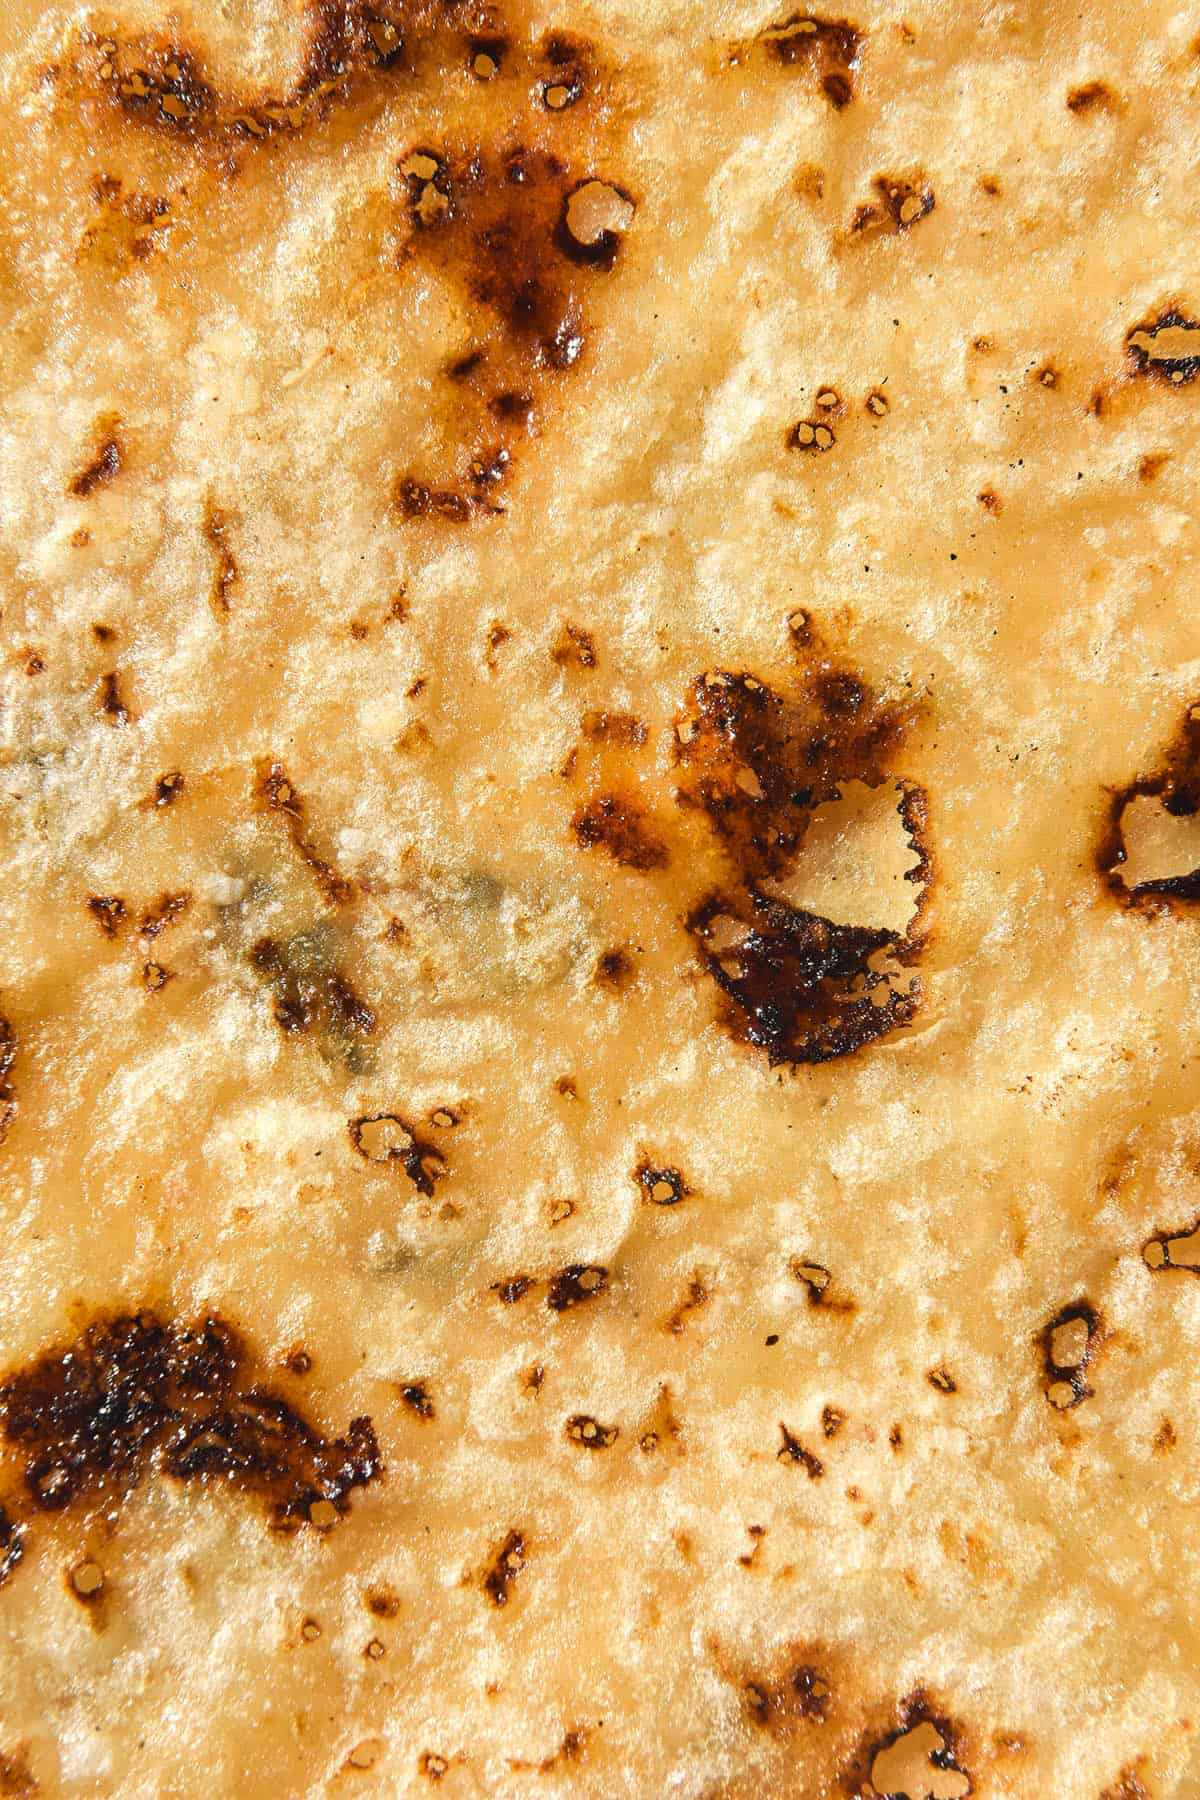 A close up macro photo of a grain free tortilla with golden brown caramelisation marks across the top of the tortilla